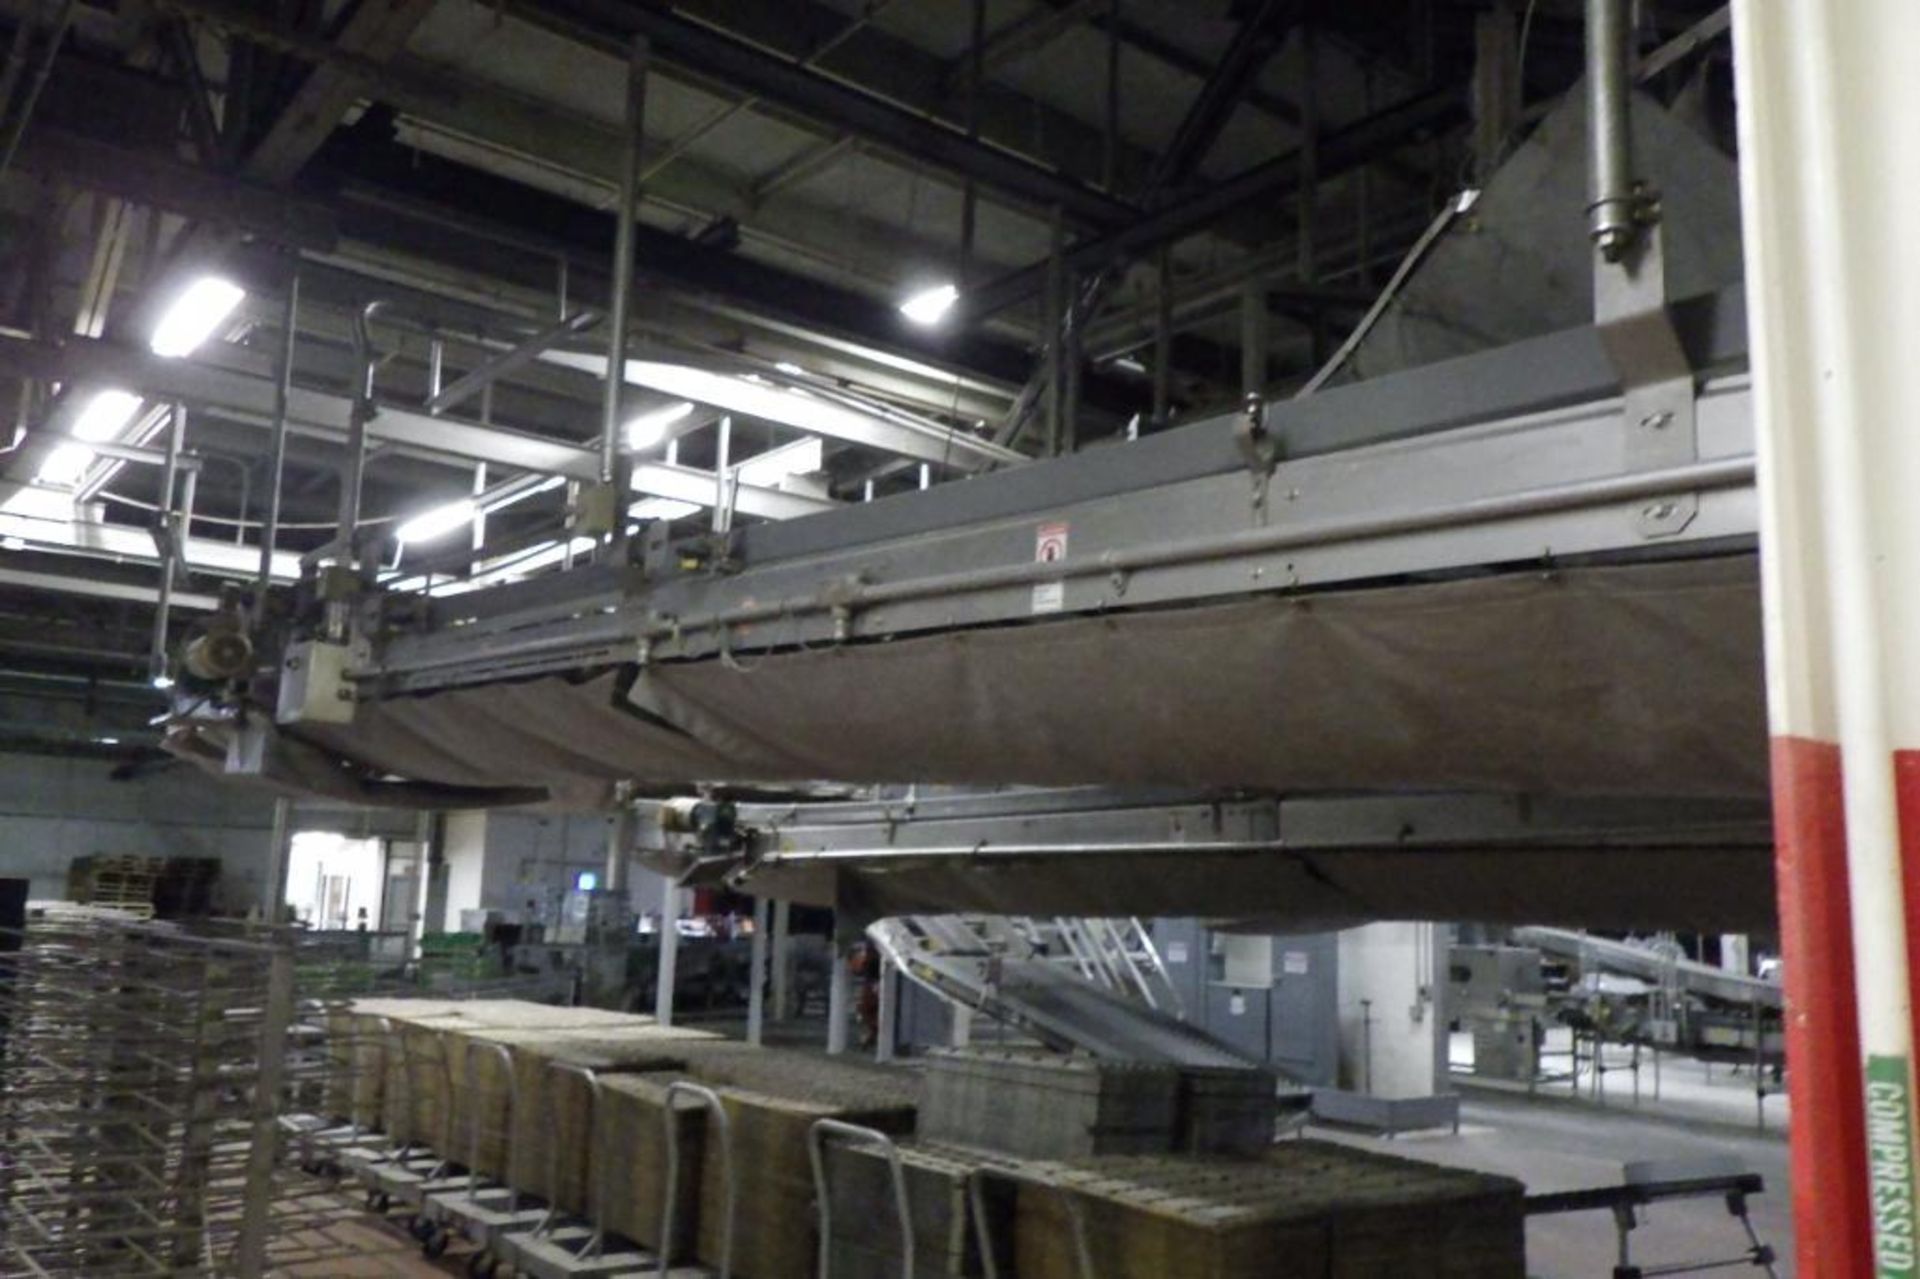 Stewart systems empty pan conveyor - Image 8 of 27